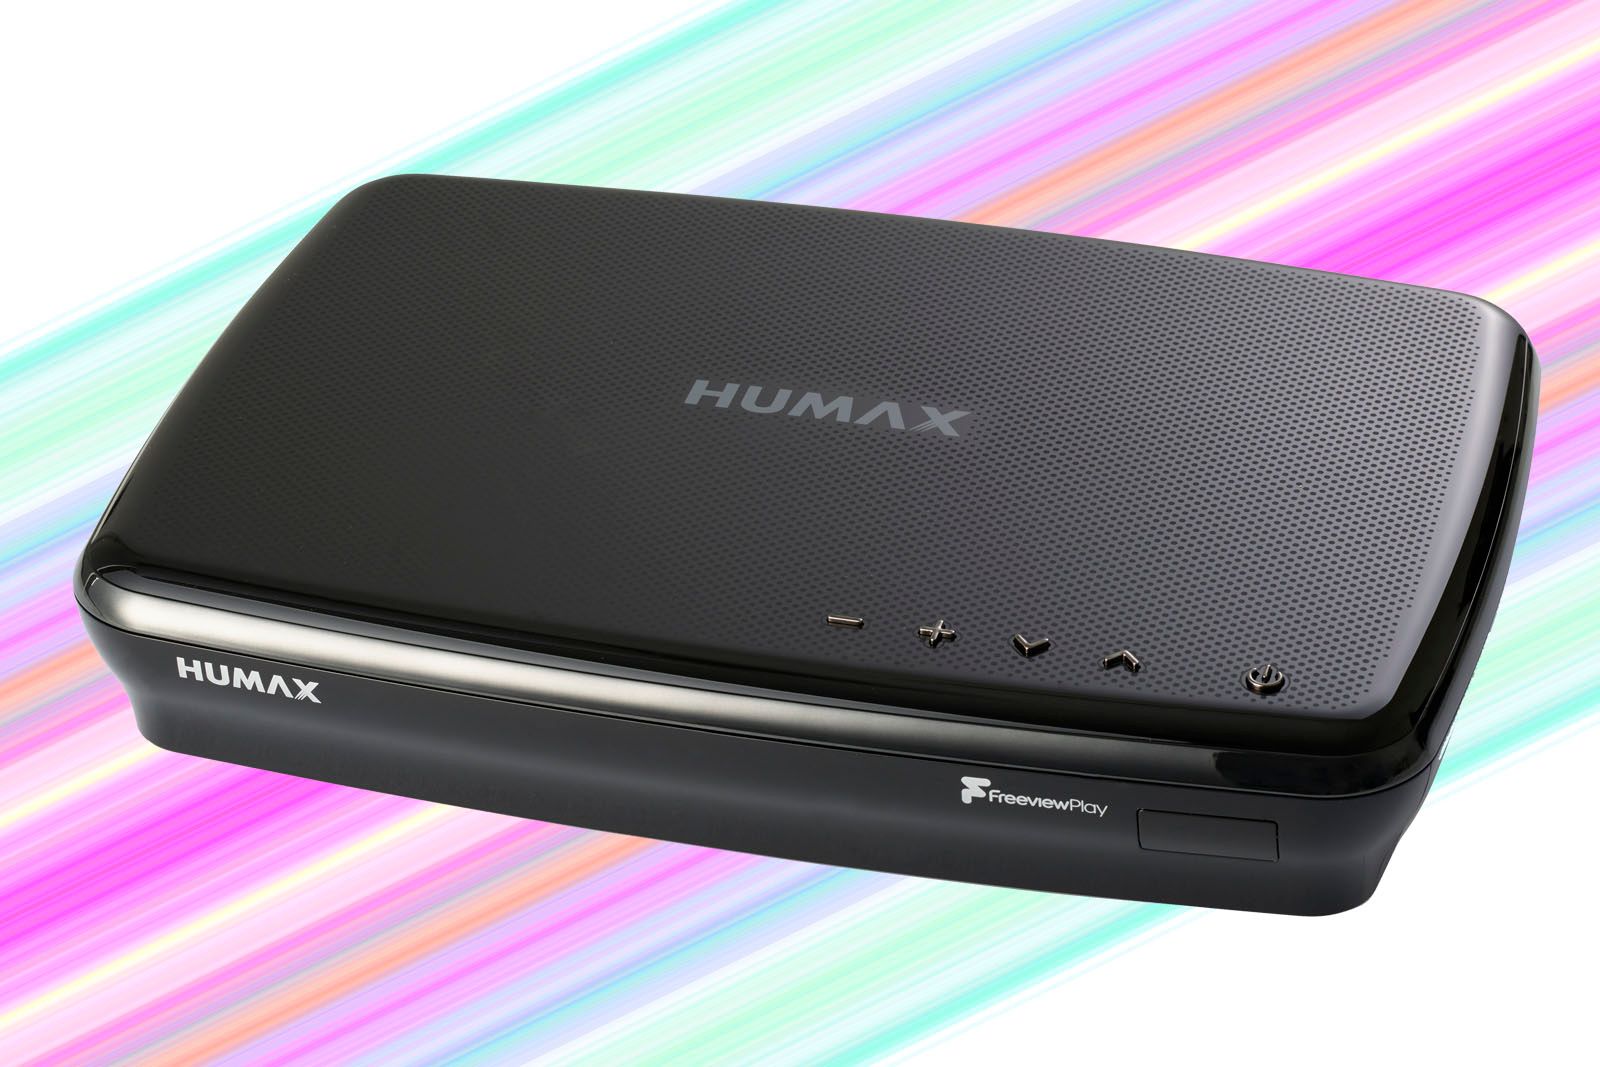 Humax 5000t Freeview Play image 2